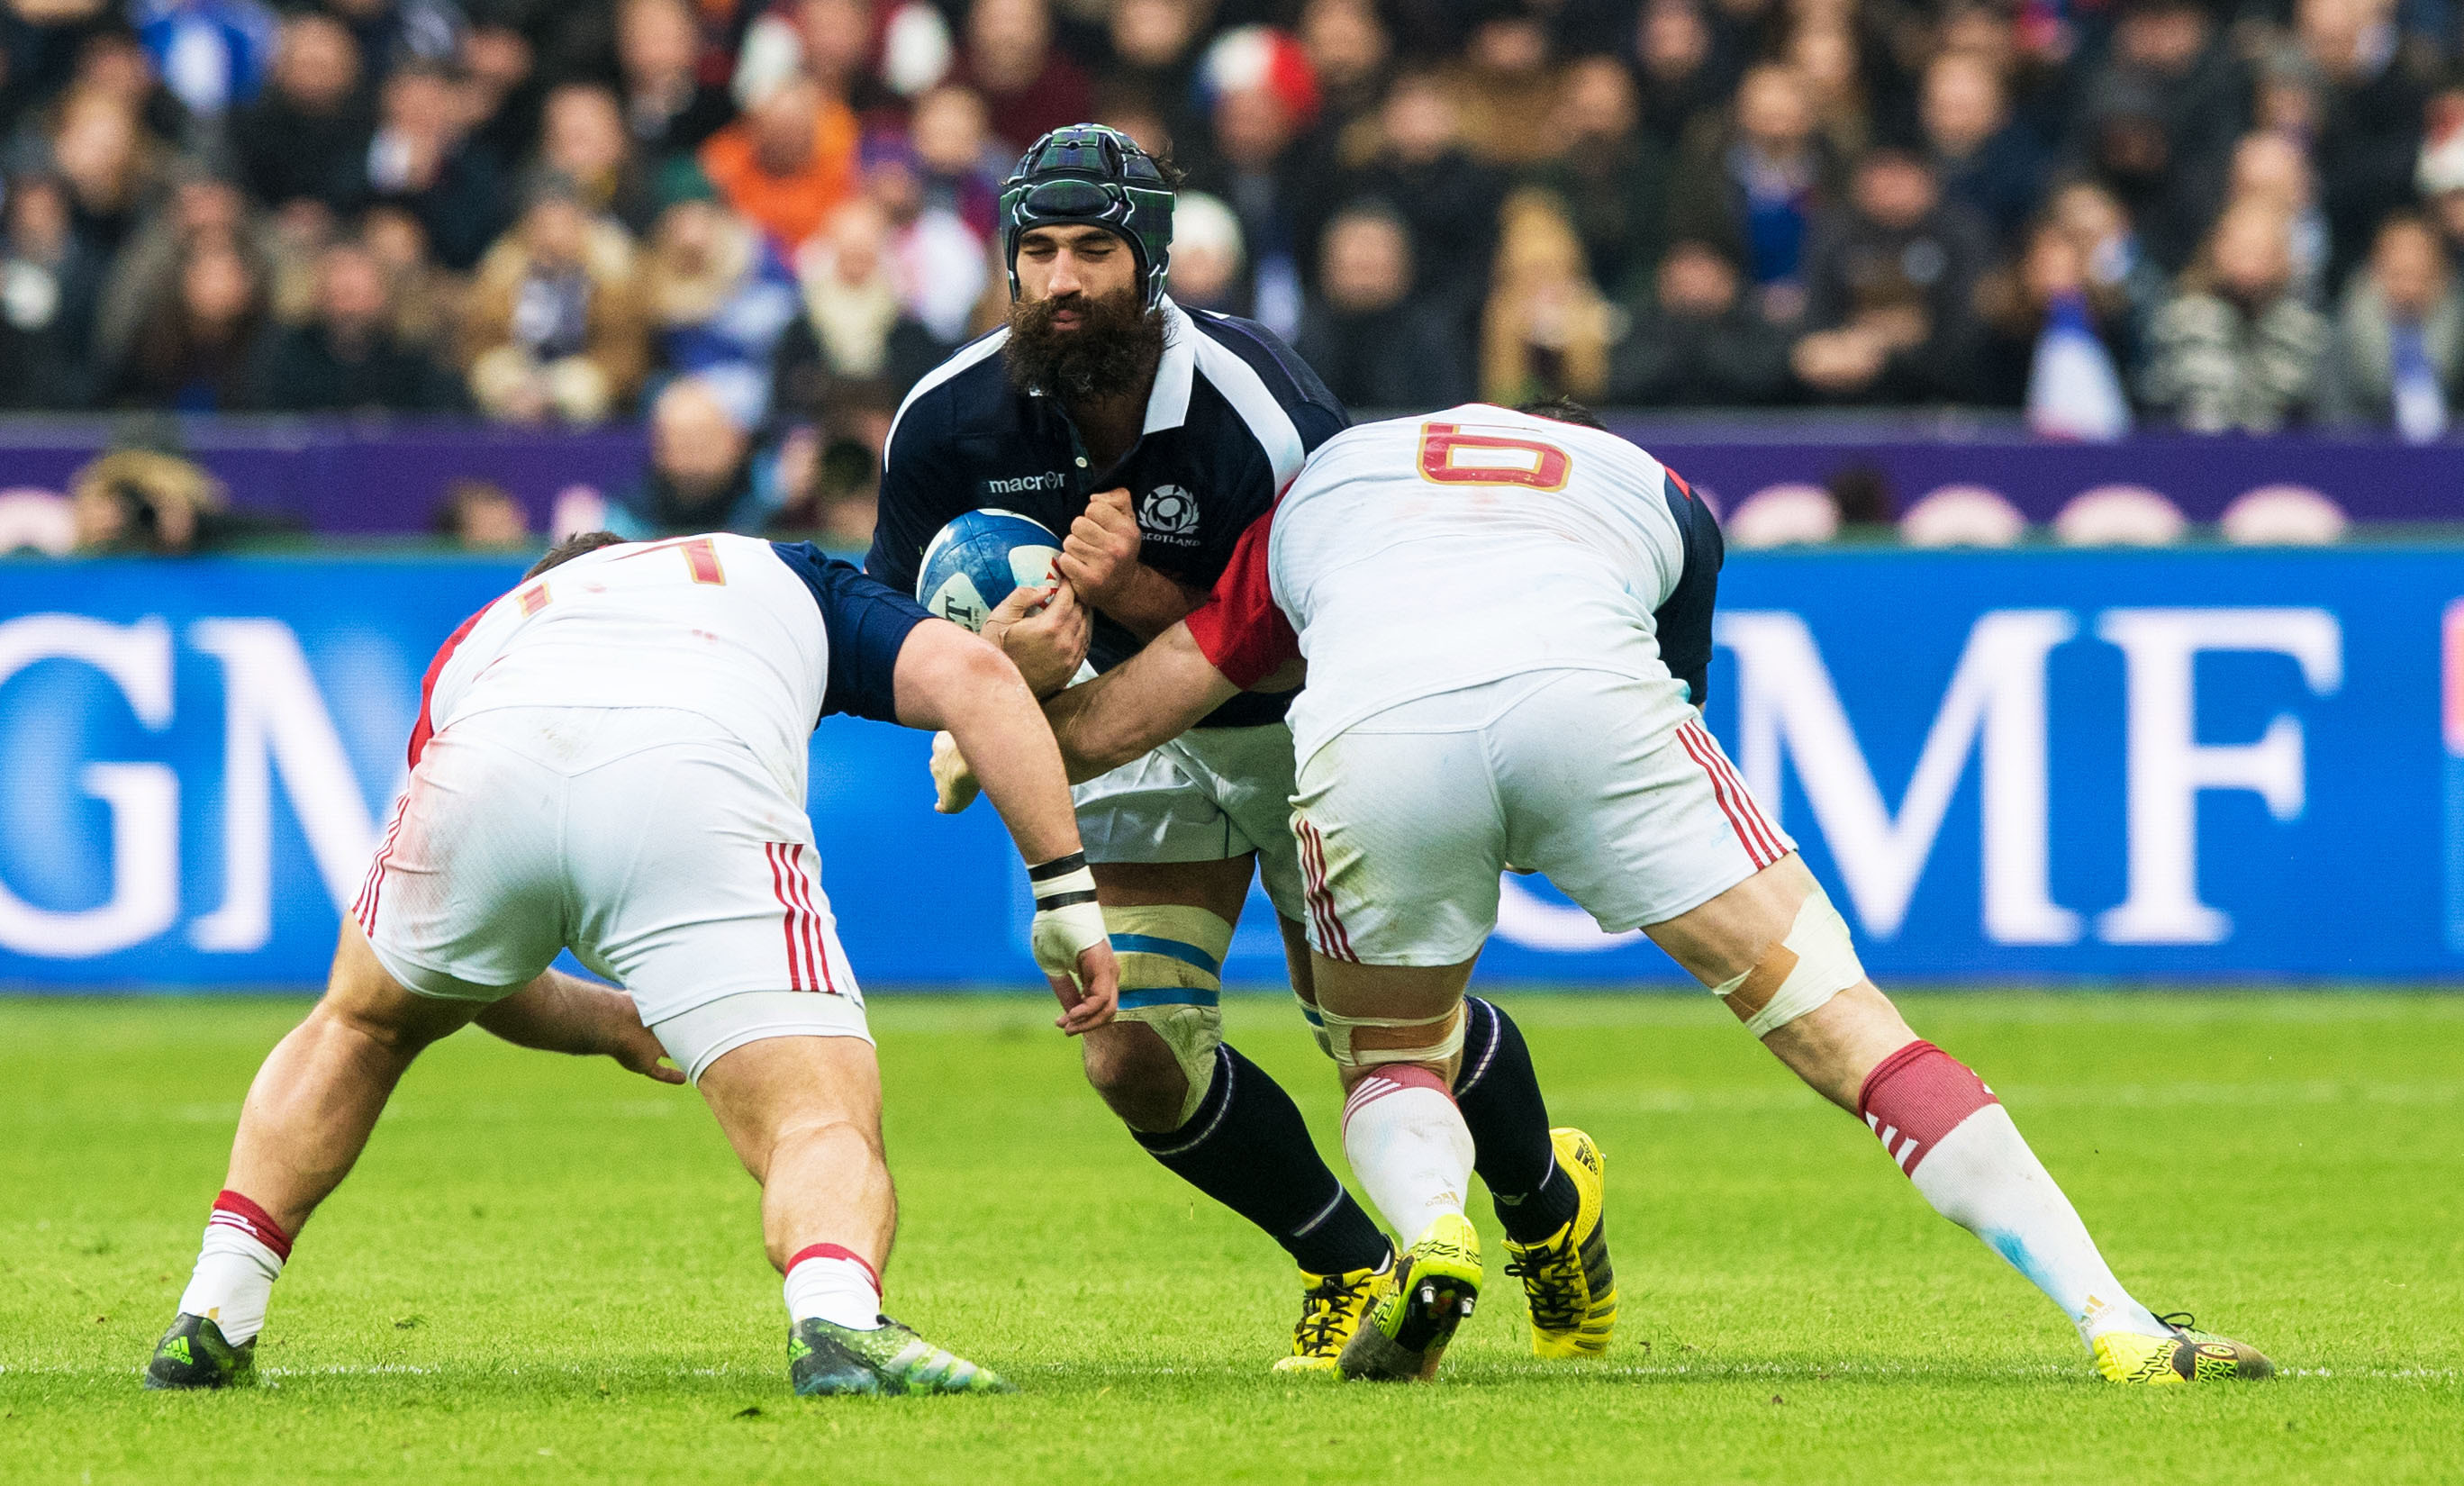 Josh Strauss was most observers' top man for Scotland in Paris on Sunday.